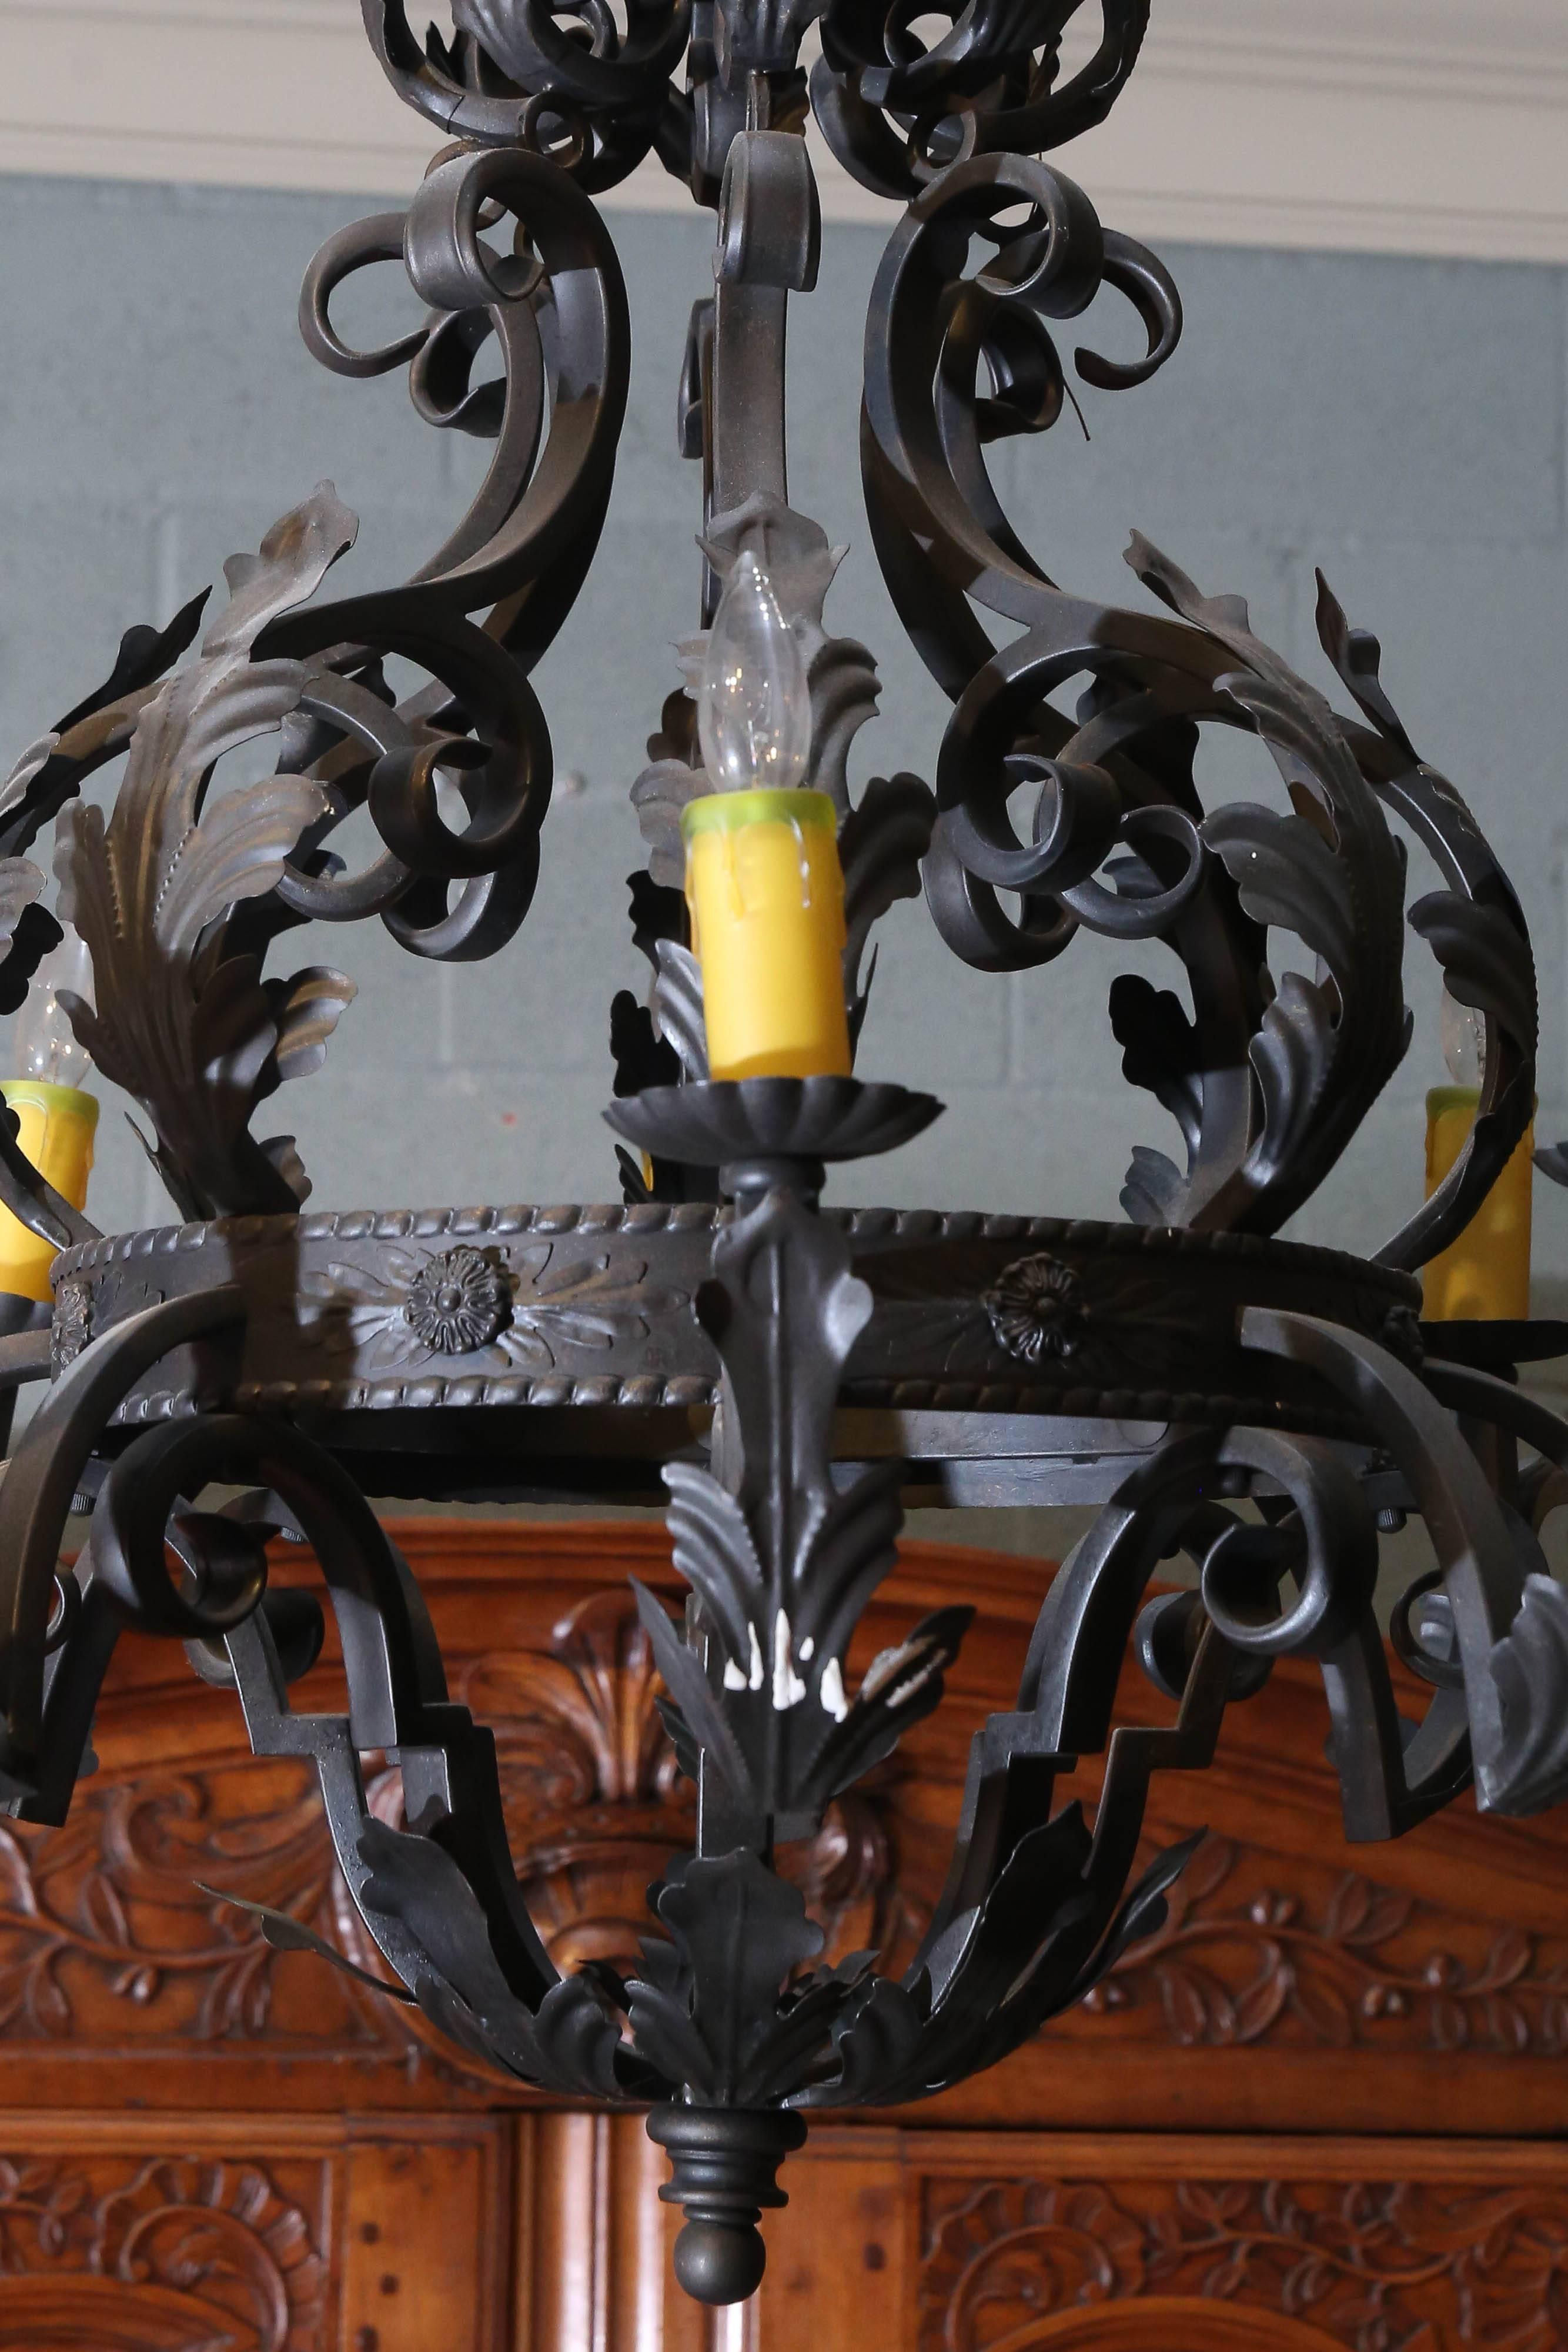 Spanish-style wrought iron has eight arms with melon-shaped bobeche and acanthus leaves attached to a centre band that is embossed and features casts rosettes.

From top of band are more acanthus leaves with more at top and bottom of